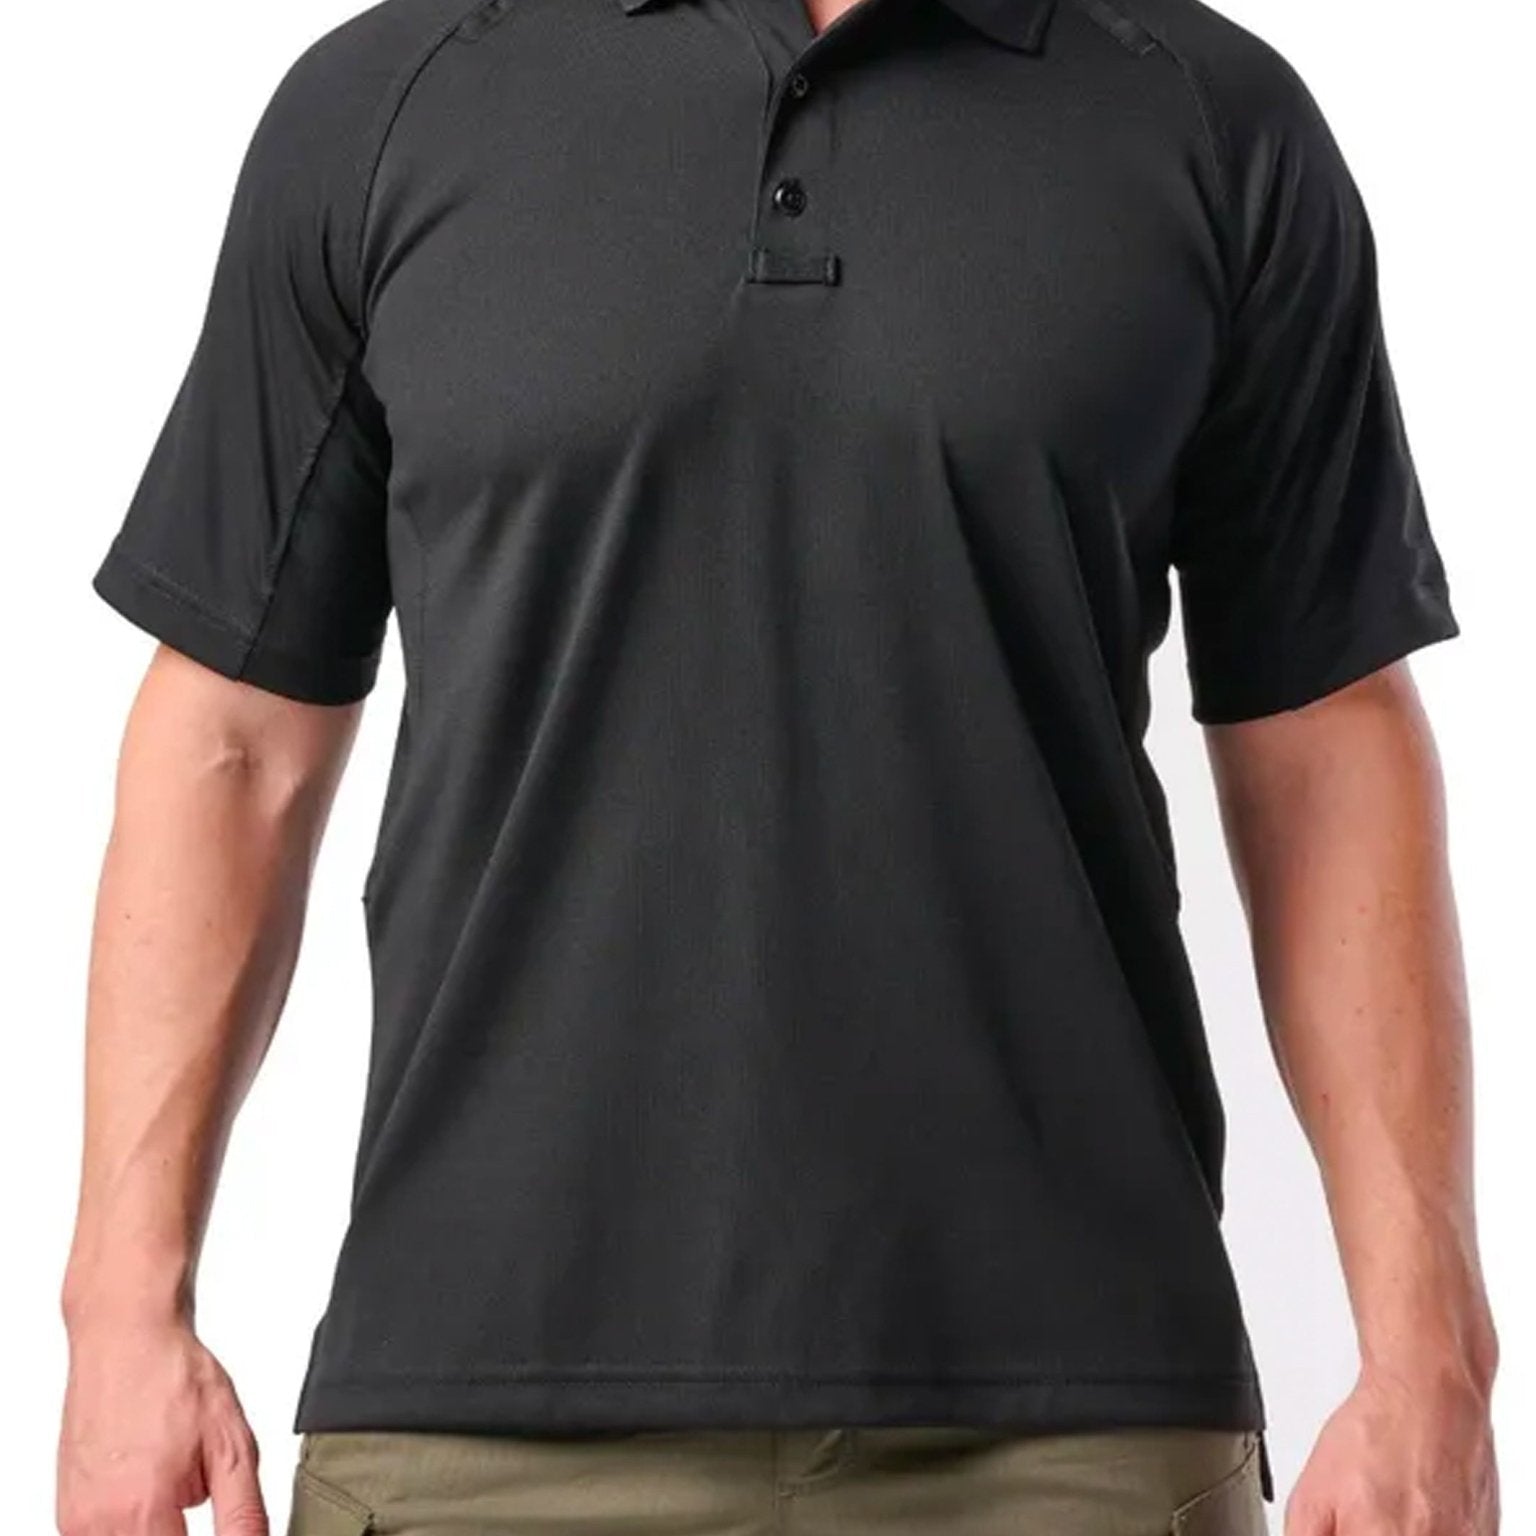 4elementsclothing5.11 Tactical5.11 Tactical - 5.11 Performance Short Sleeve Polo Shirt - Quick Dry moisture wicking - Style 71049T-Shirt71049-019-XS